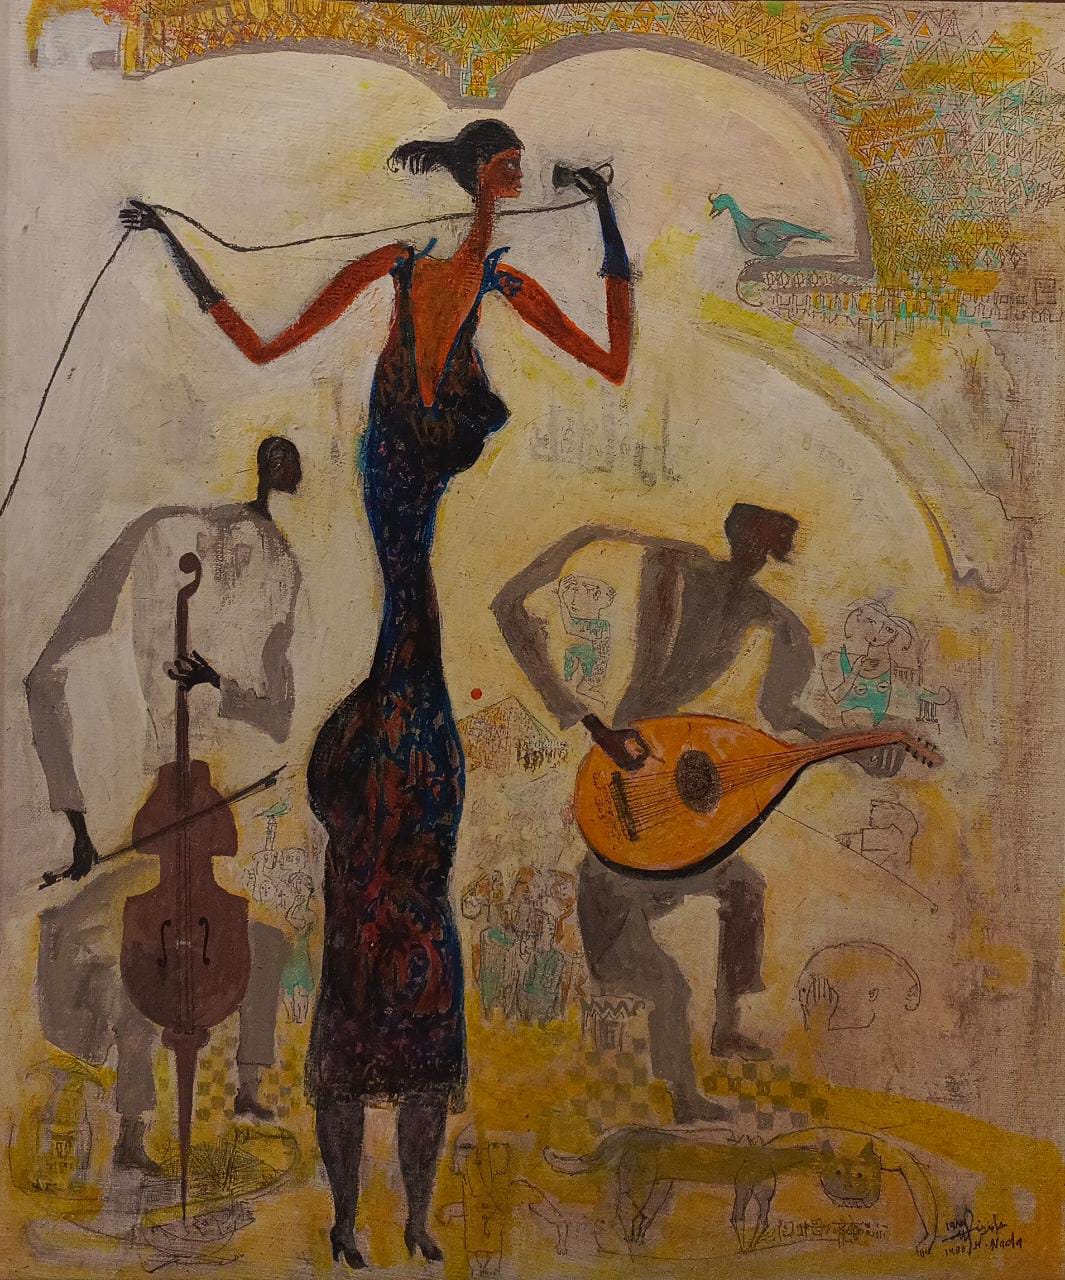 Hamed Nada (1924-1990)  Chanteuse d’hôtel / Hotel Singer, 1977  Oil on canvas 60x40cm Signed and dated  MG-223-MA